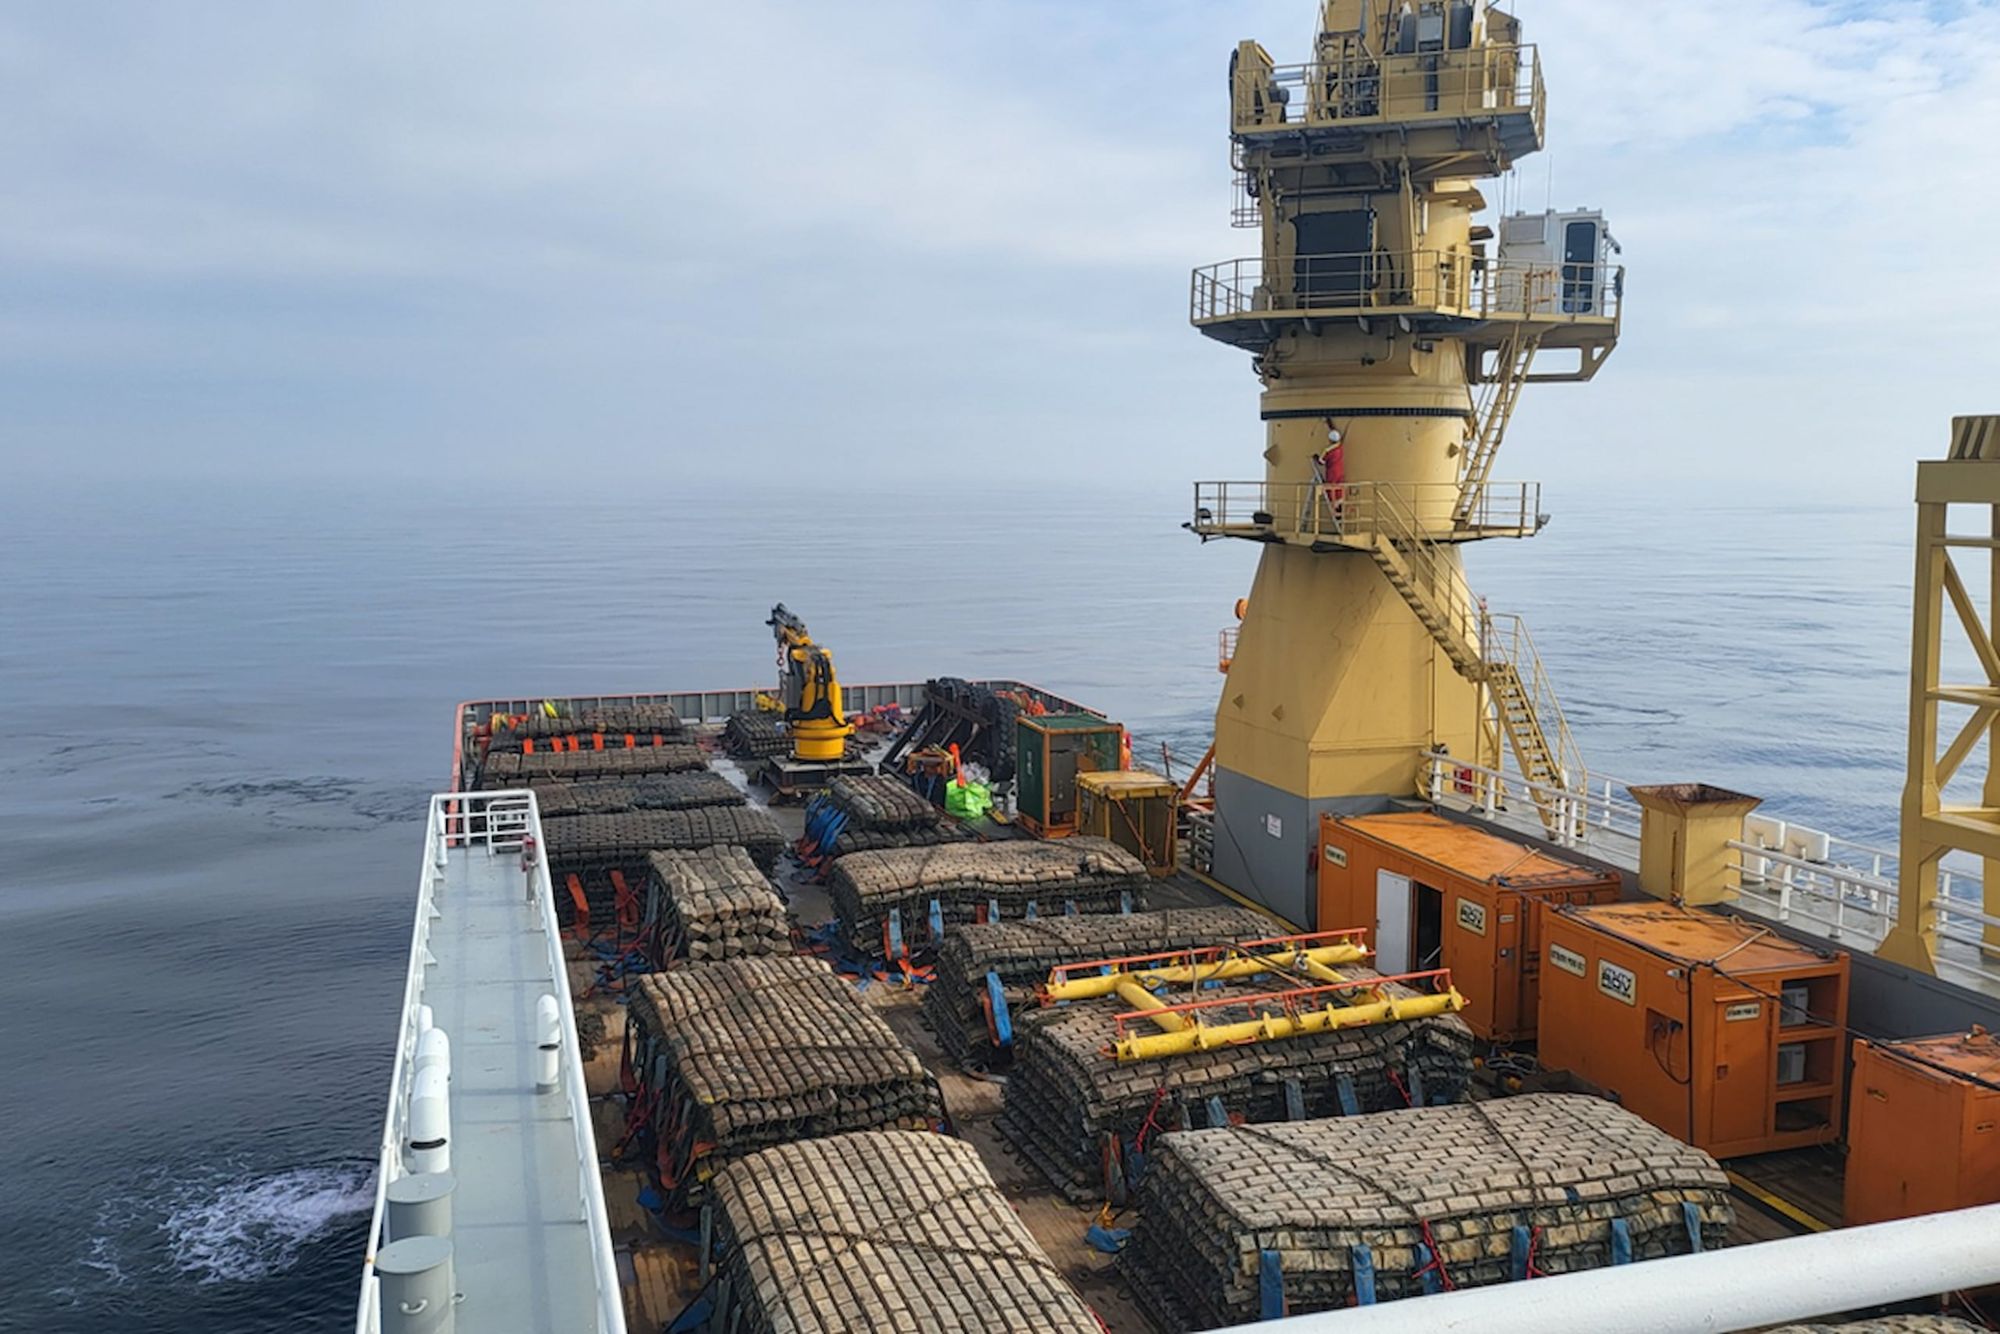 DeepOcean adds 120-day offshore recycling job to its task list